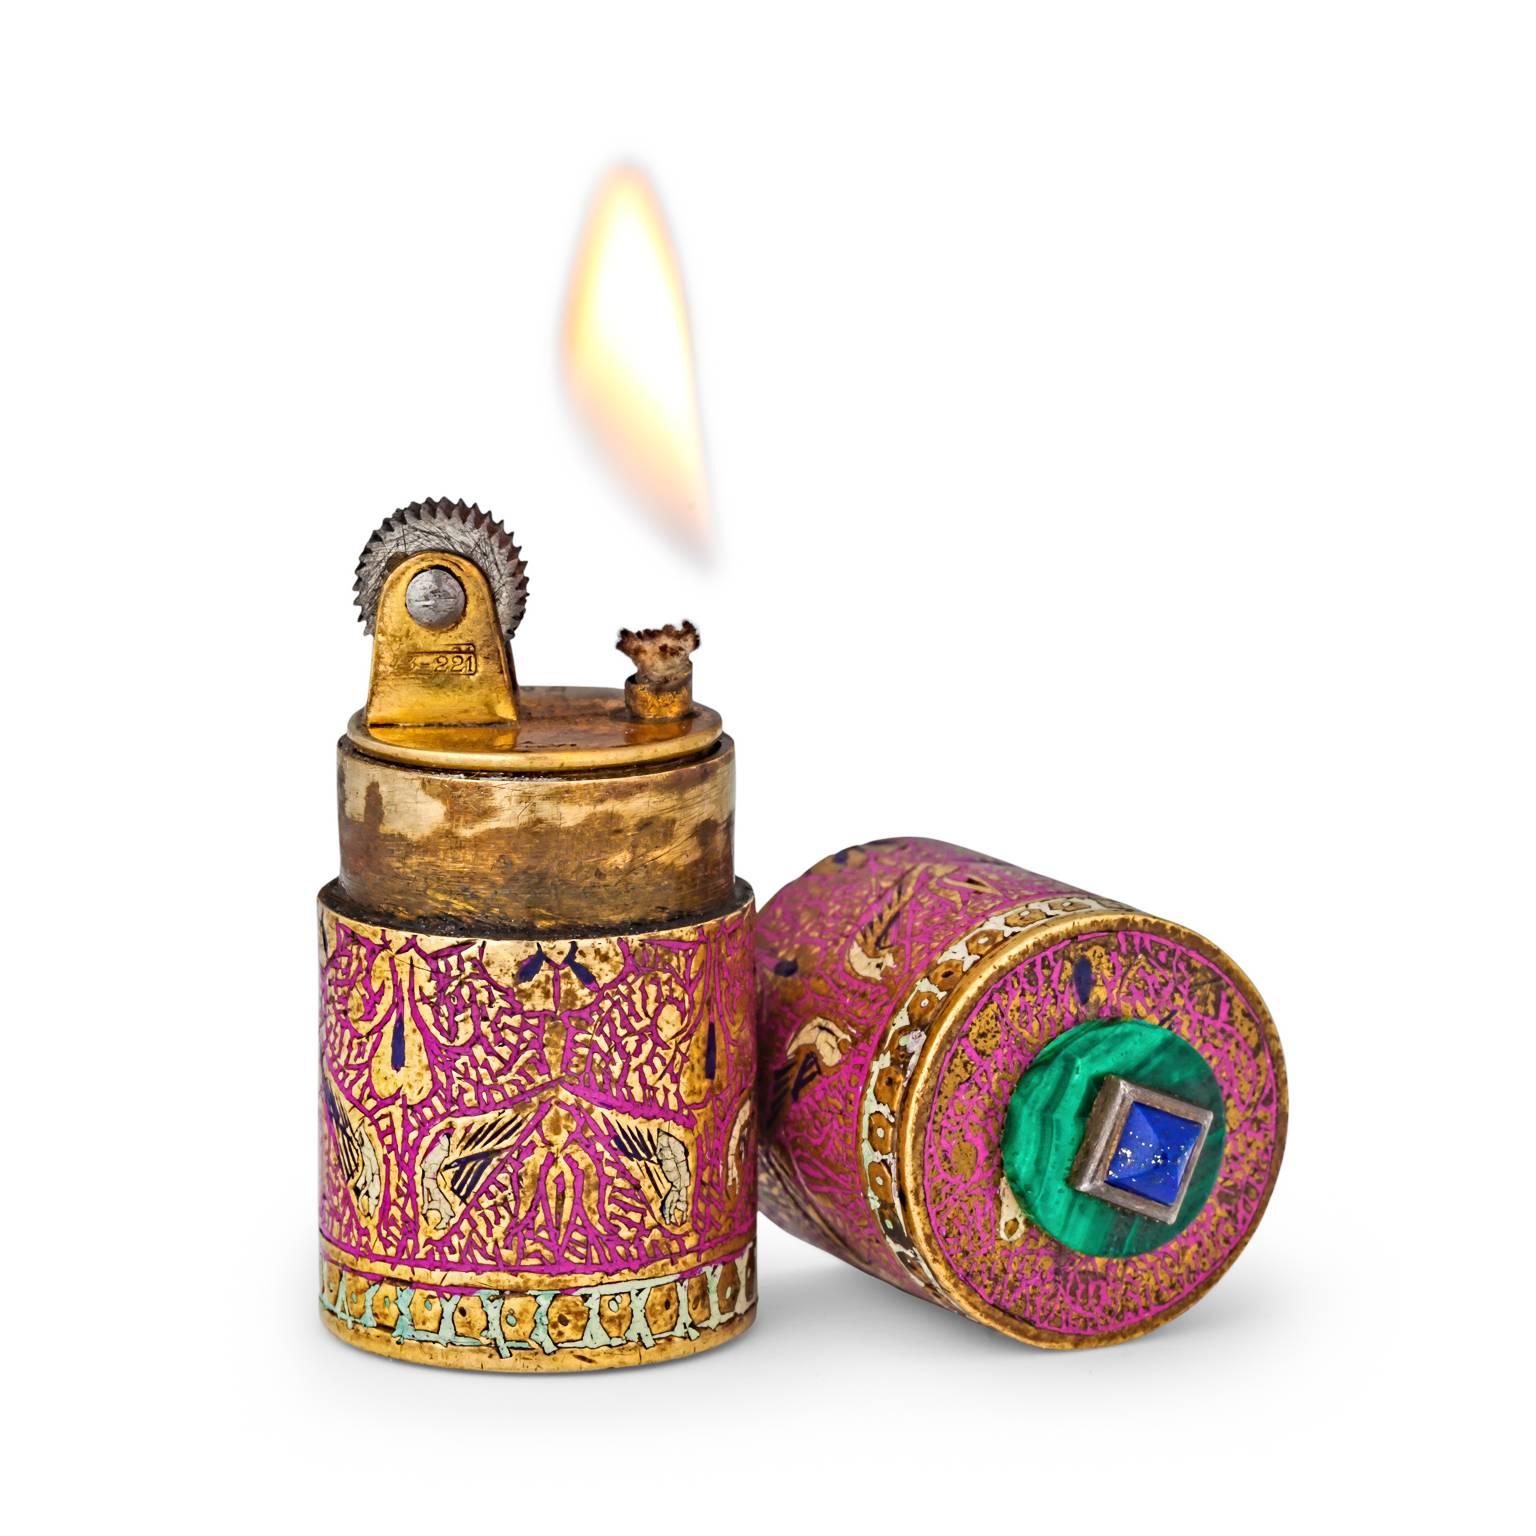 Light up your life with this colorful cloisonne enamel Art Deco, circa 1920, Cartier lighter.  This rare cylindrical lighter is elegantly enameled with a delicate bird and leaf design and topped with malachite and lapis stone accents making it both